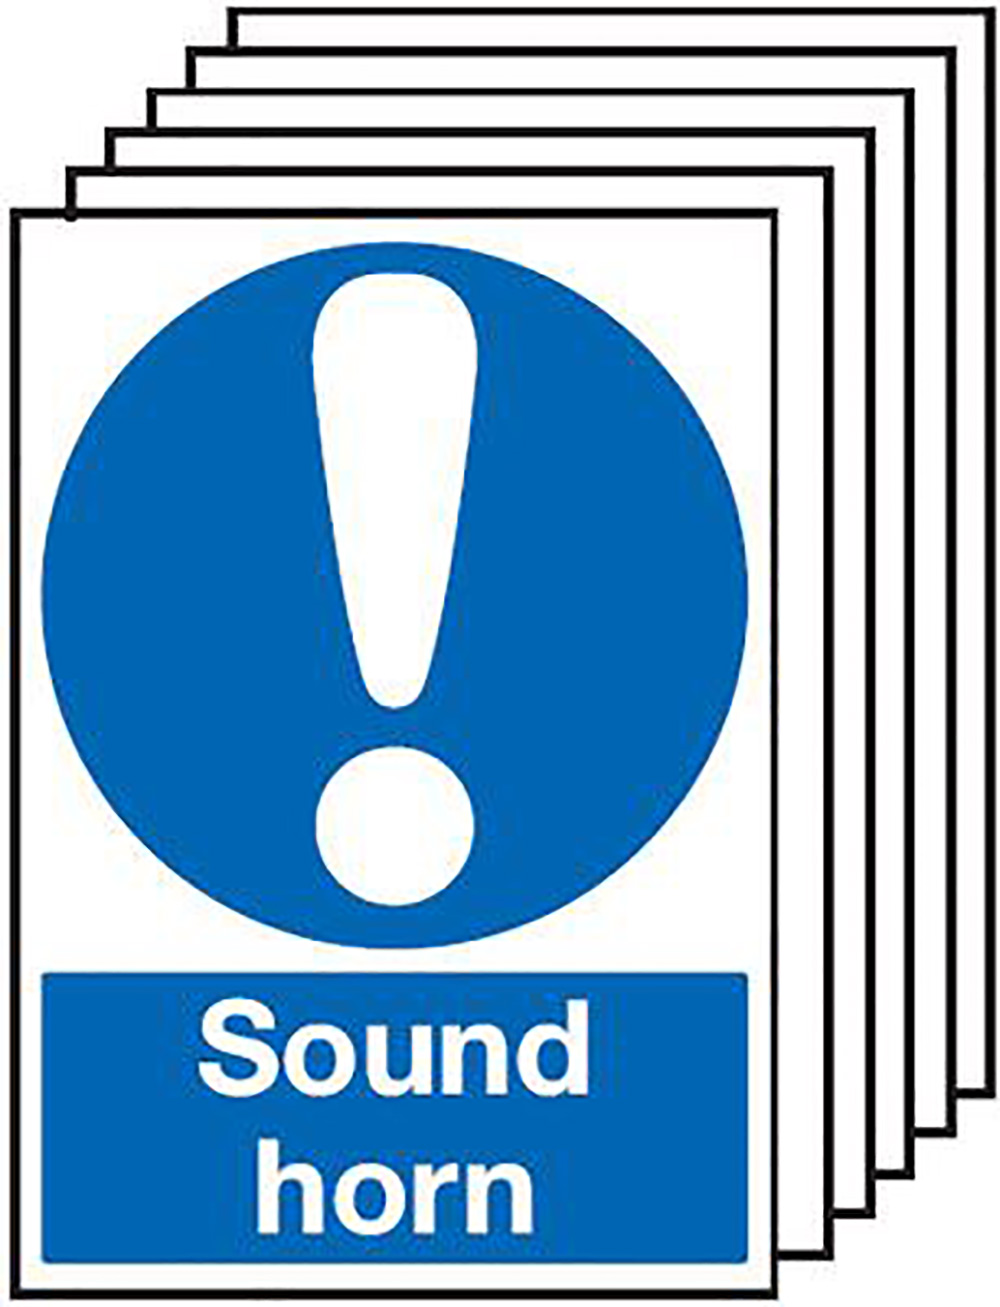 Sound Horn  297x210mm Self Adhesive Vinyl Safety Sign Pack of 6 